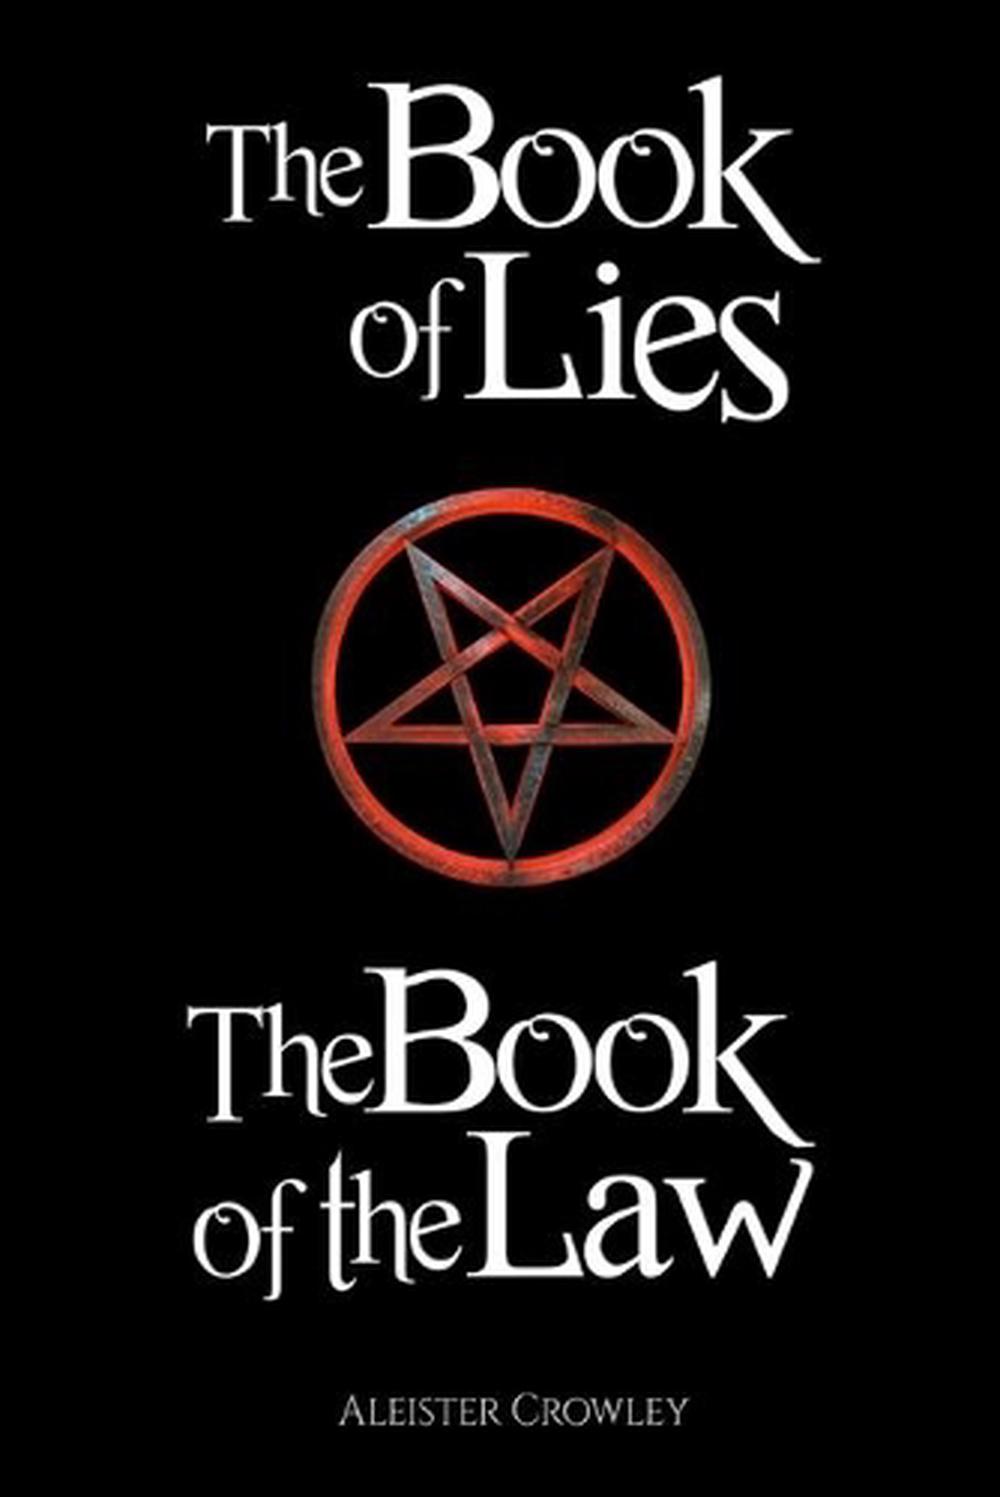 56  Aleister Crowley The Book Of Law Pdf for business